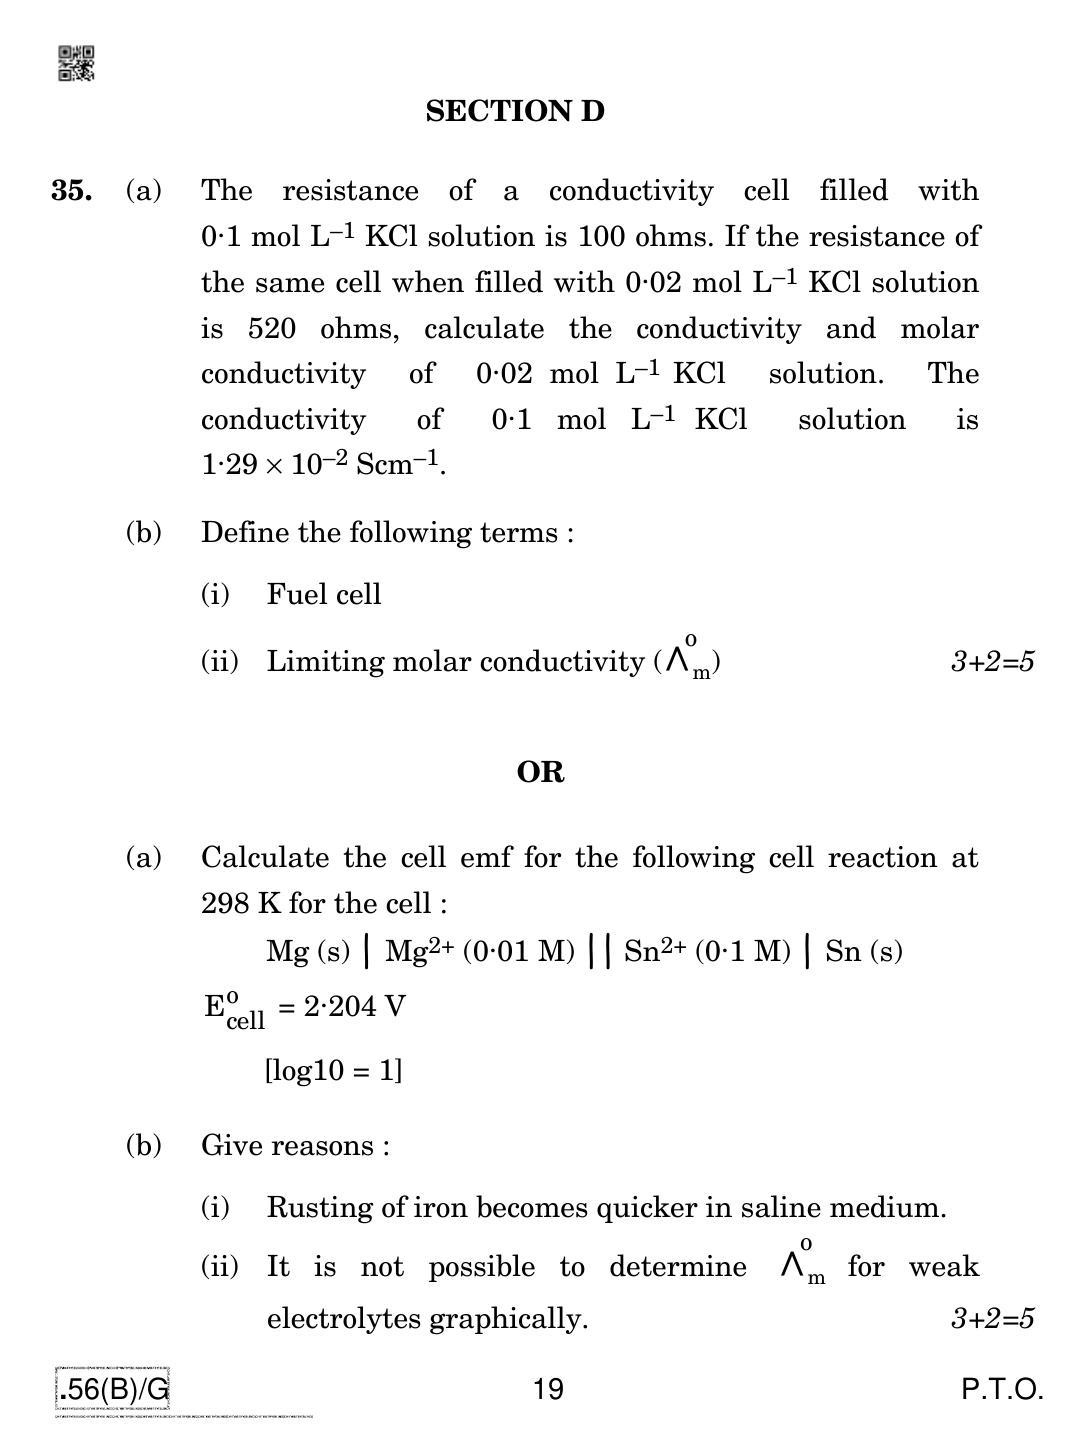 CBSE Class 12 56(B)-C - Chemistry For Blind Candidates 2020 Compartment Question Paper - Page 19